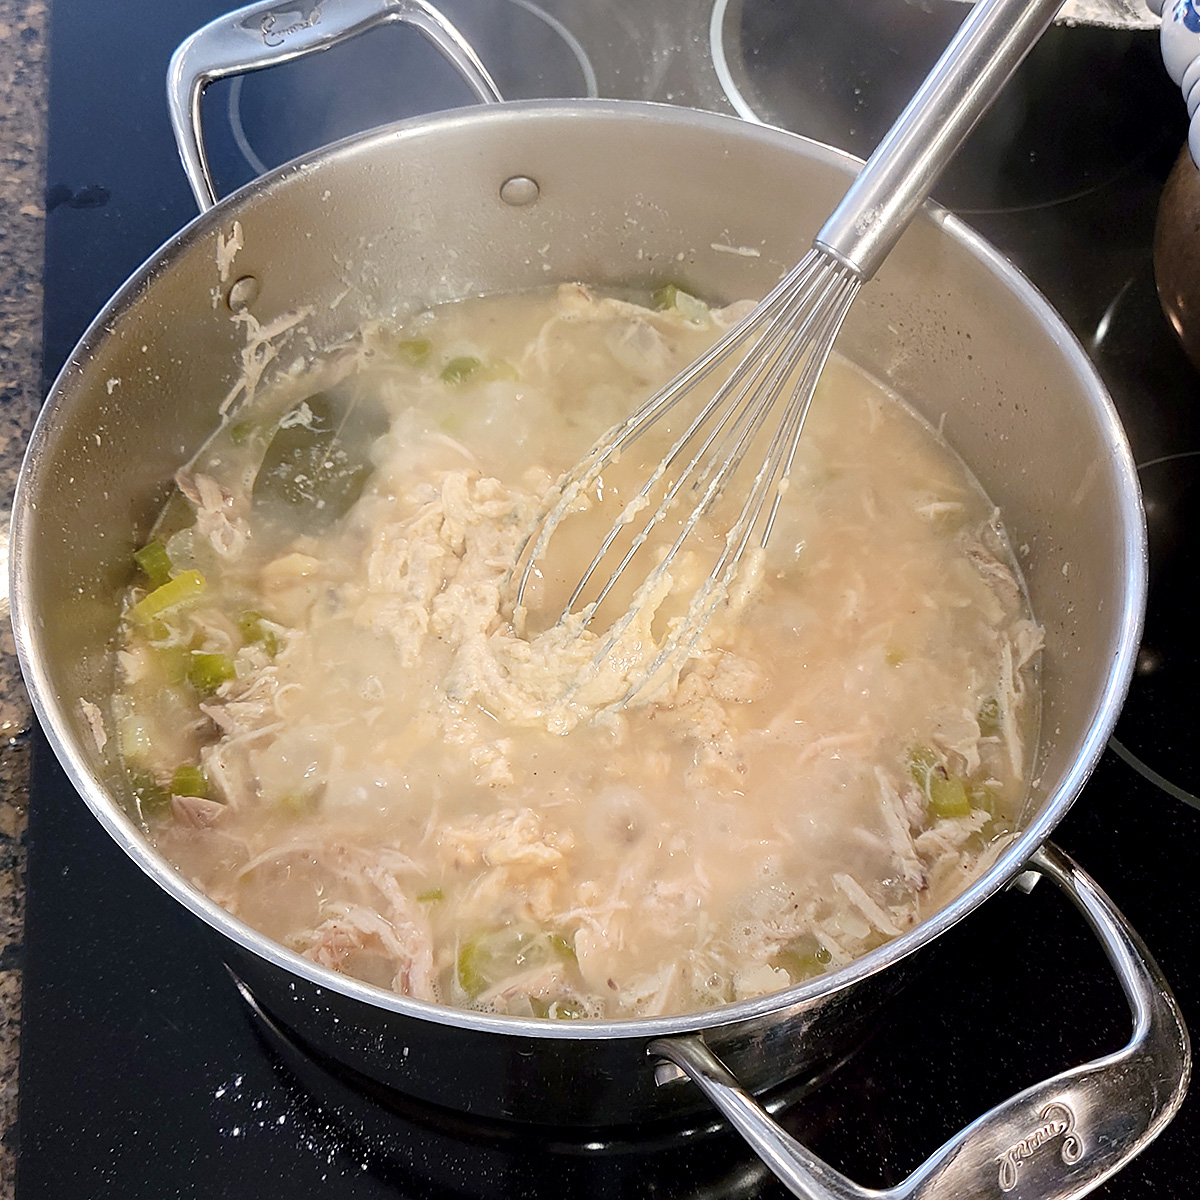 Soup, butter, flour mixture being whisked into boiling stock and meat.